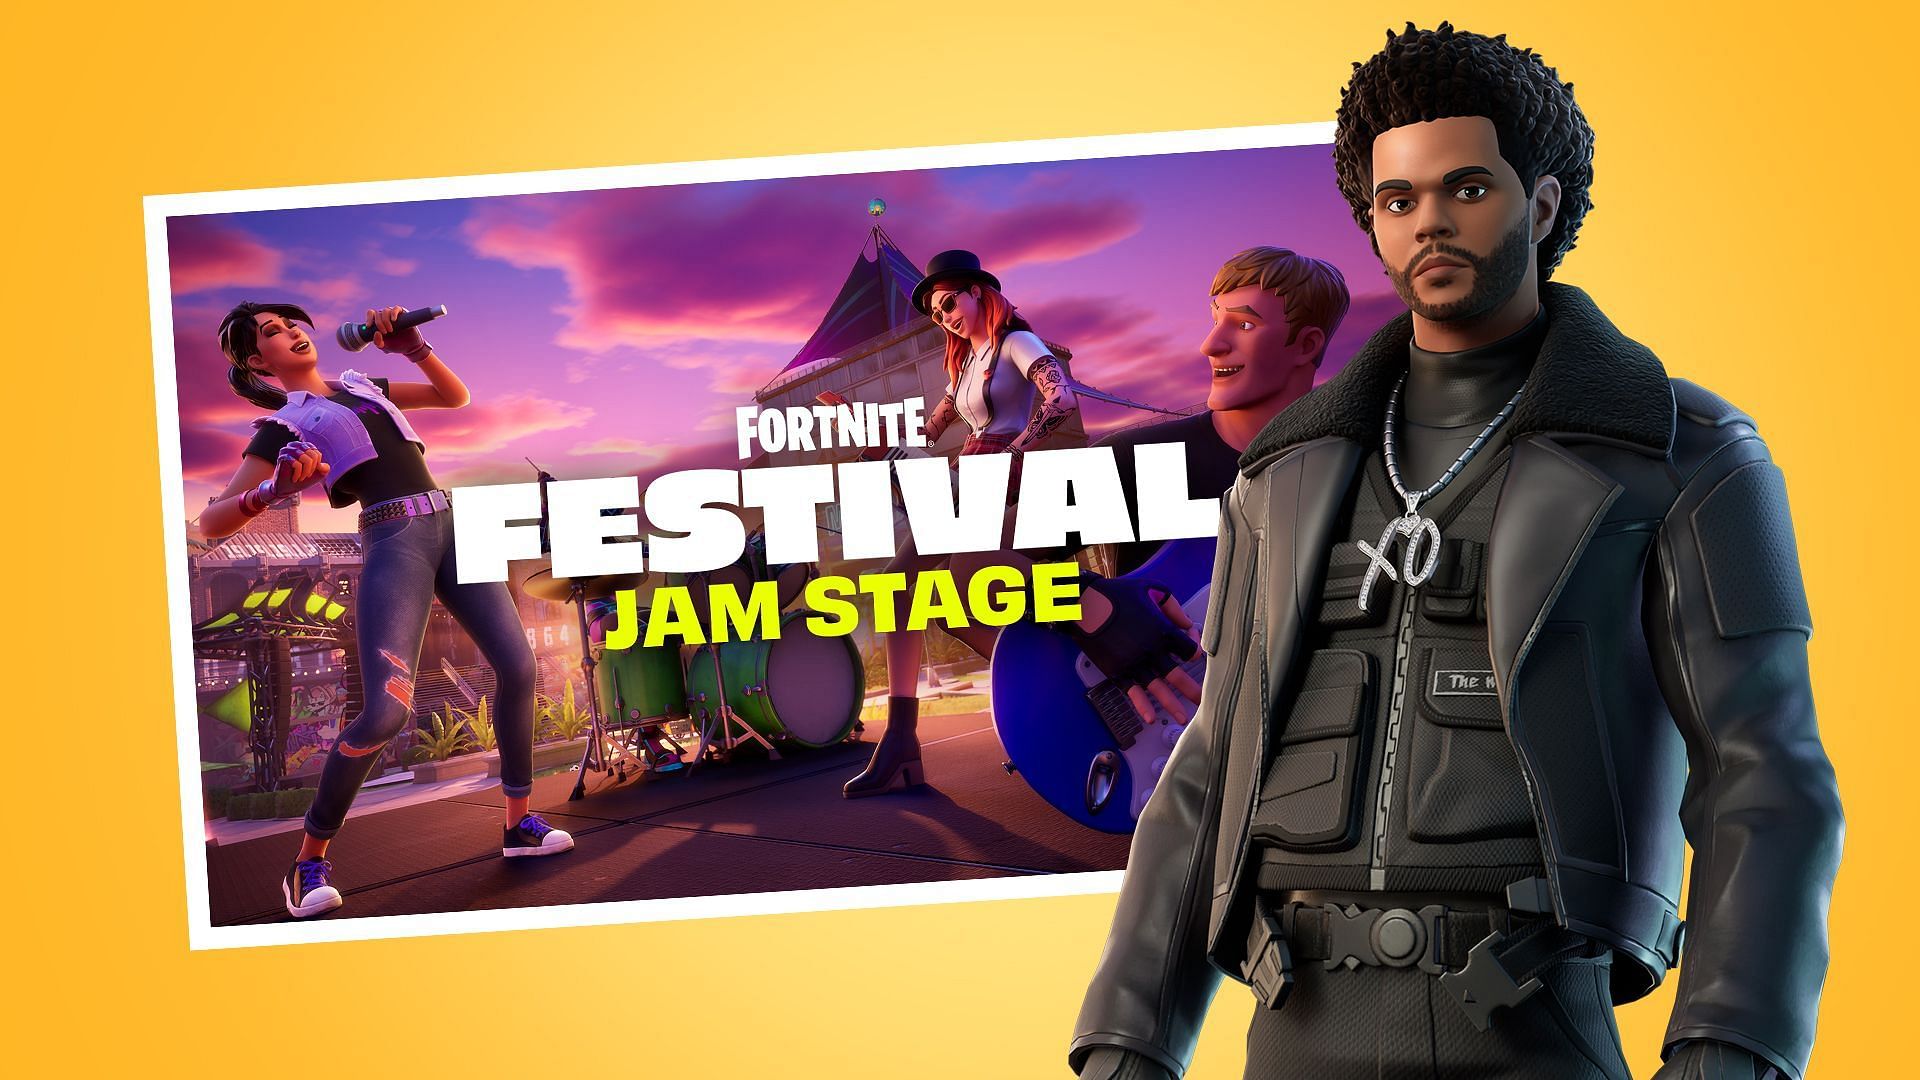 How to watch &quot;Popular&quot; by The Weeknd, Madonna, and Playboi Carti in Fortnite Festival